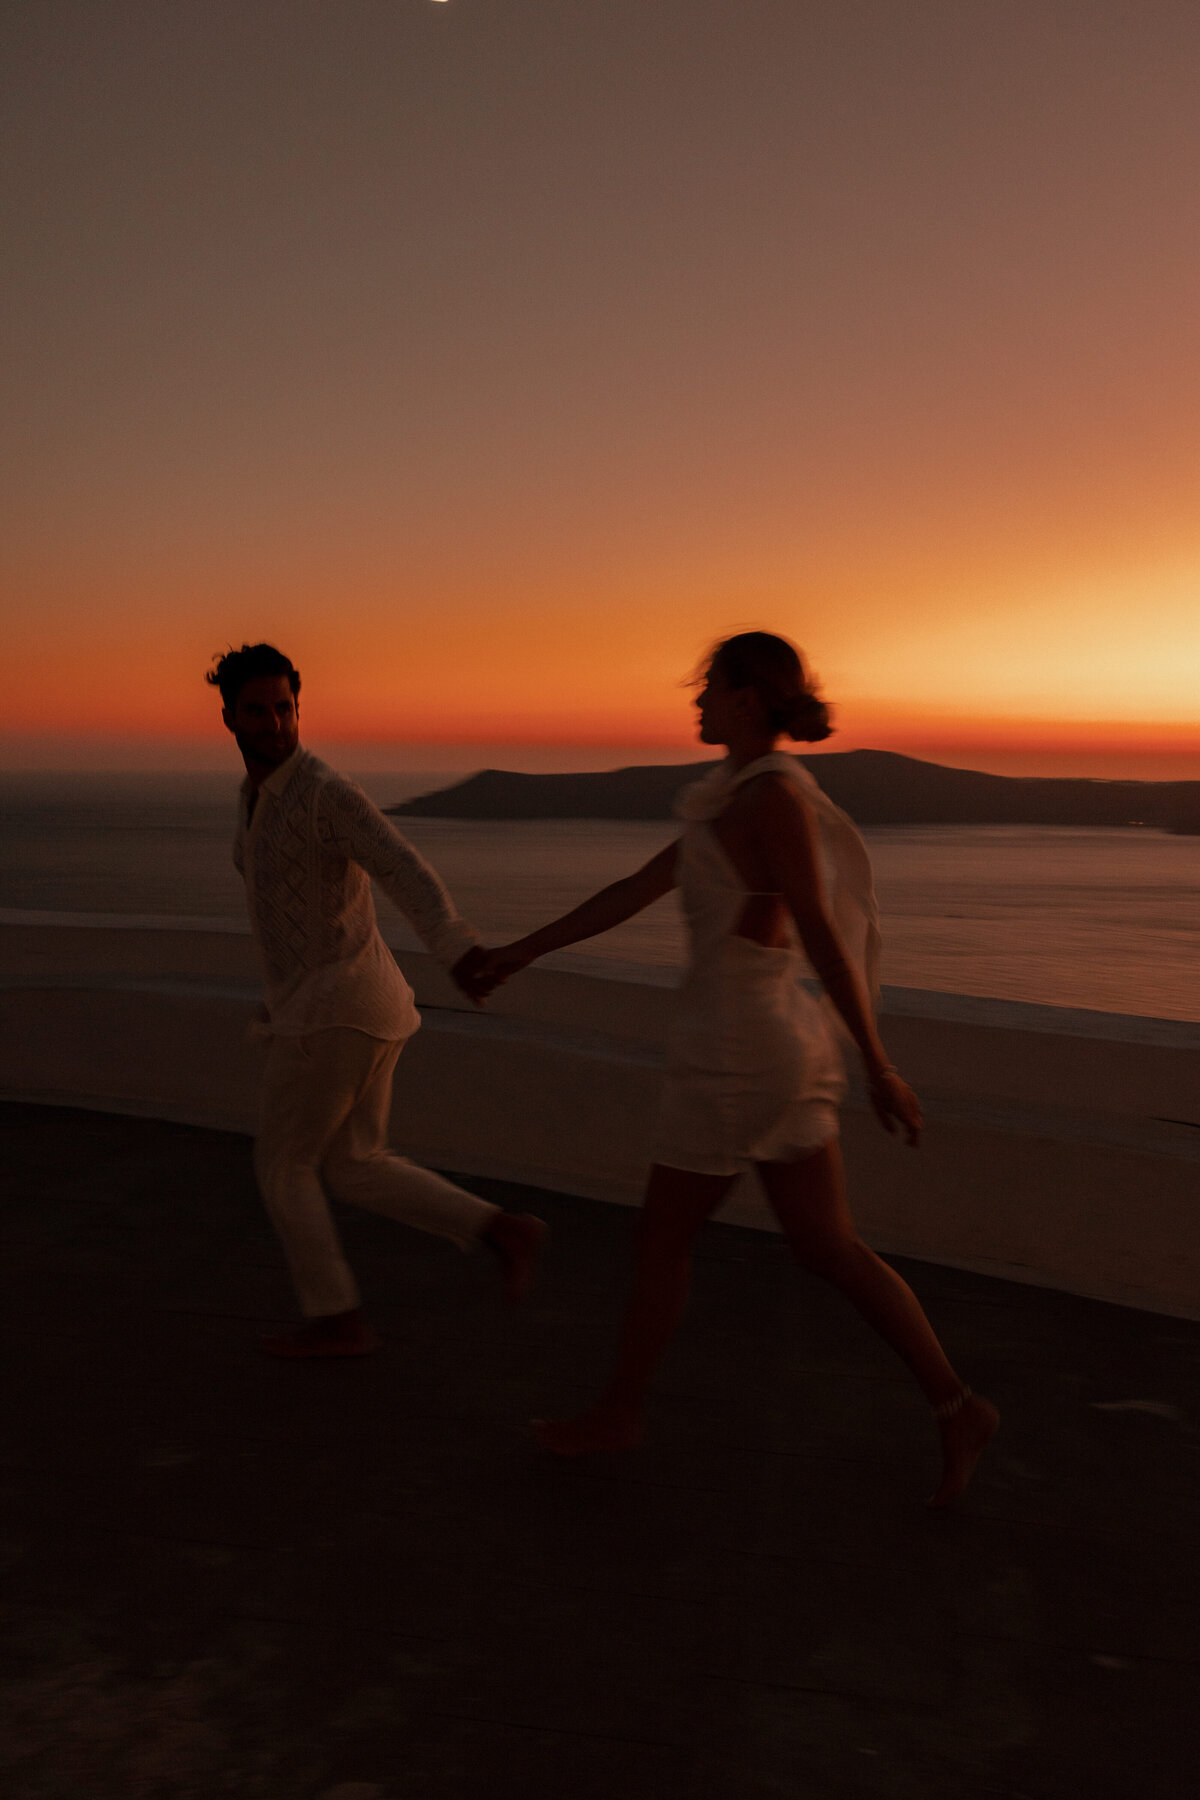 santorini-greece-cathedral-elopement-blue-dome-romantic-timeless-sunset-europe-553